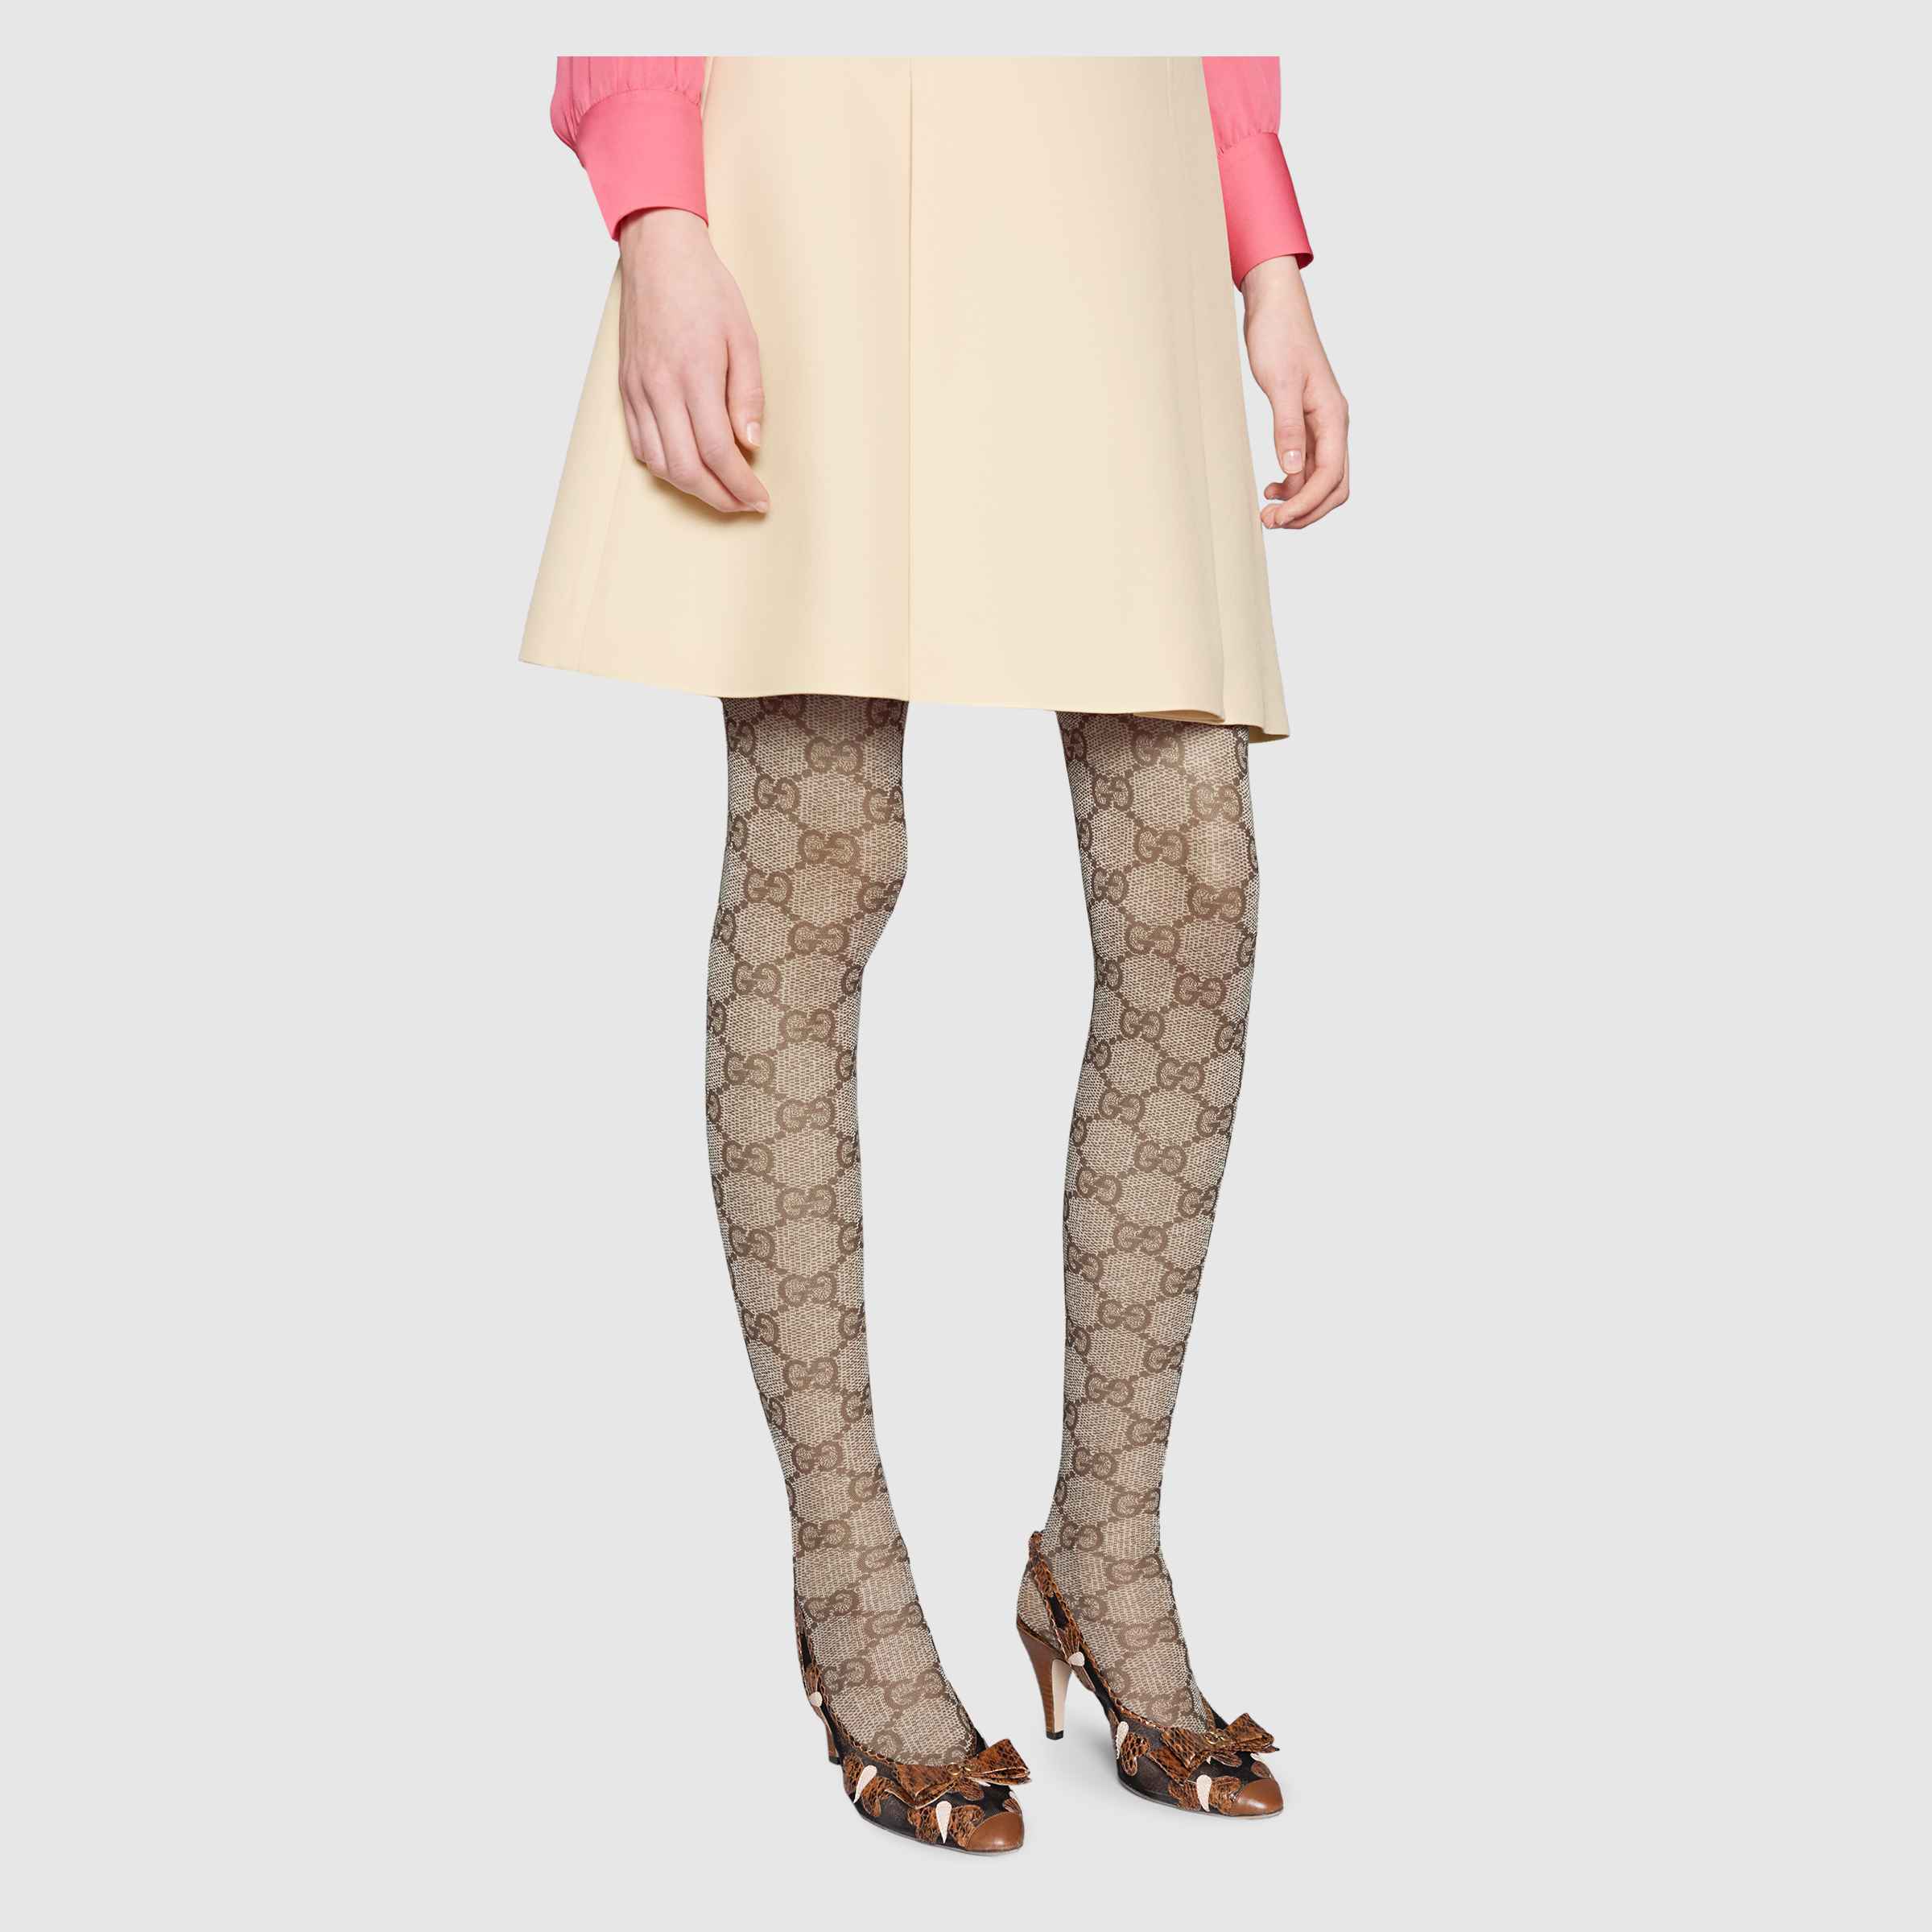 Gucci Tights and Parisian Style, Juliette Laura